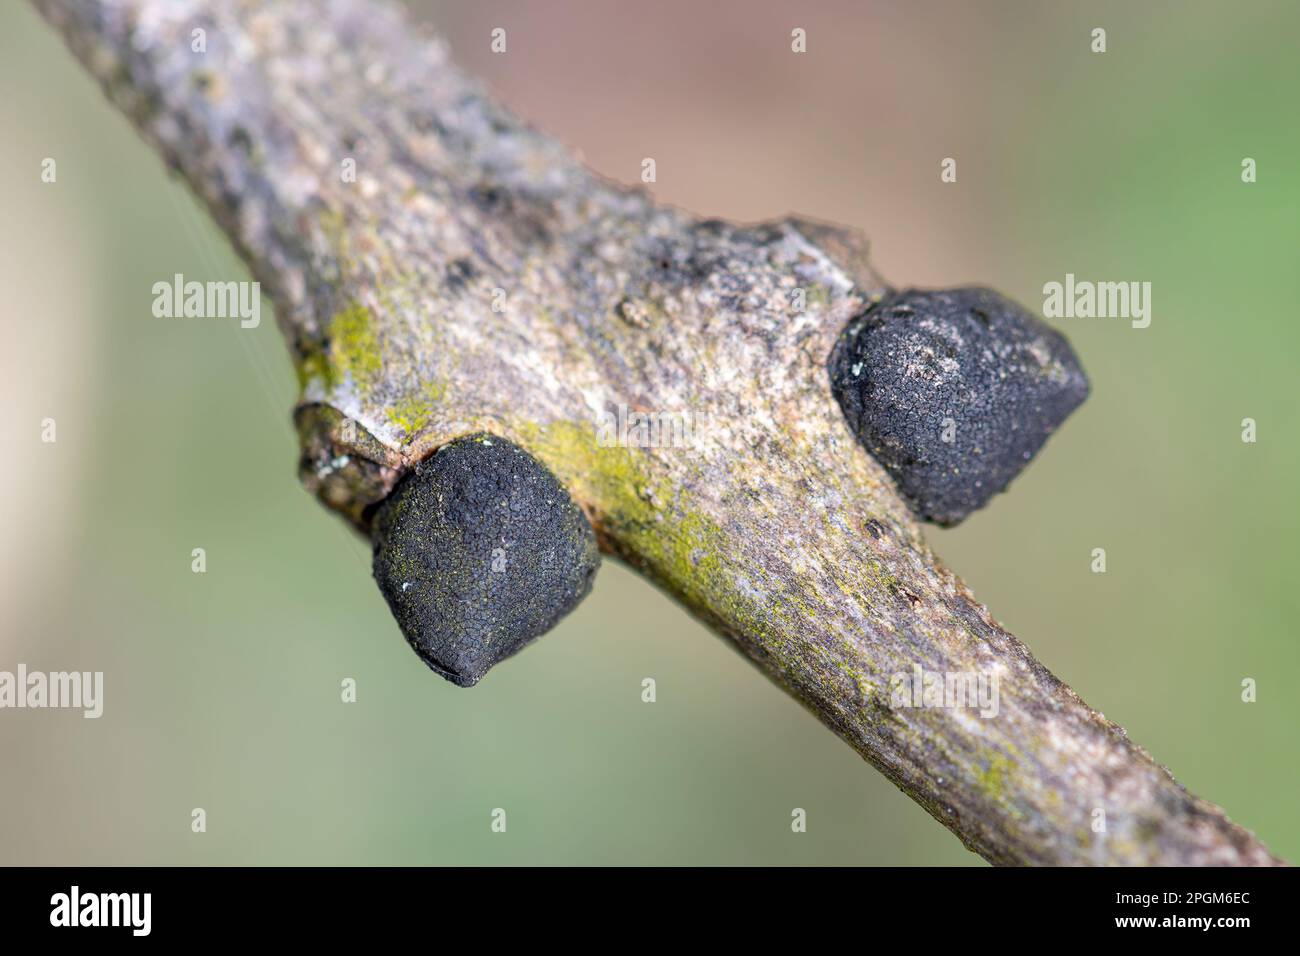 Ash tree (Fraxinus excelsior) close-up showing the black buds, England, UK, during spring Stock Photo